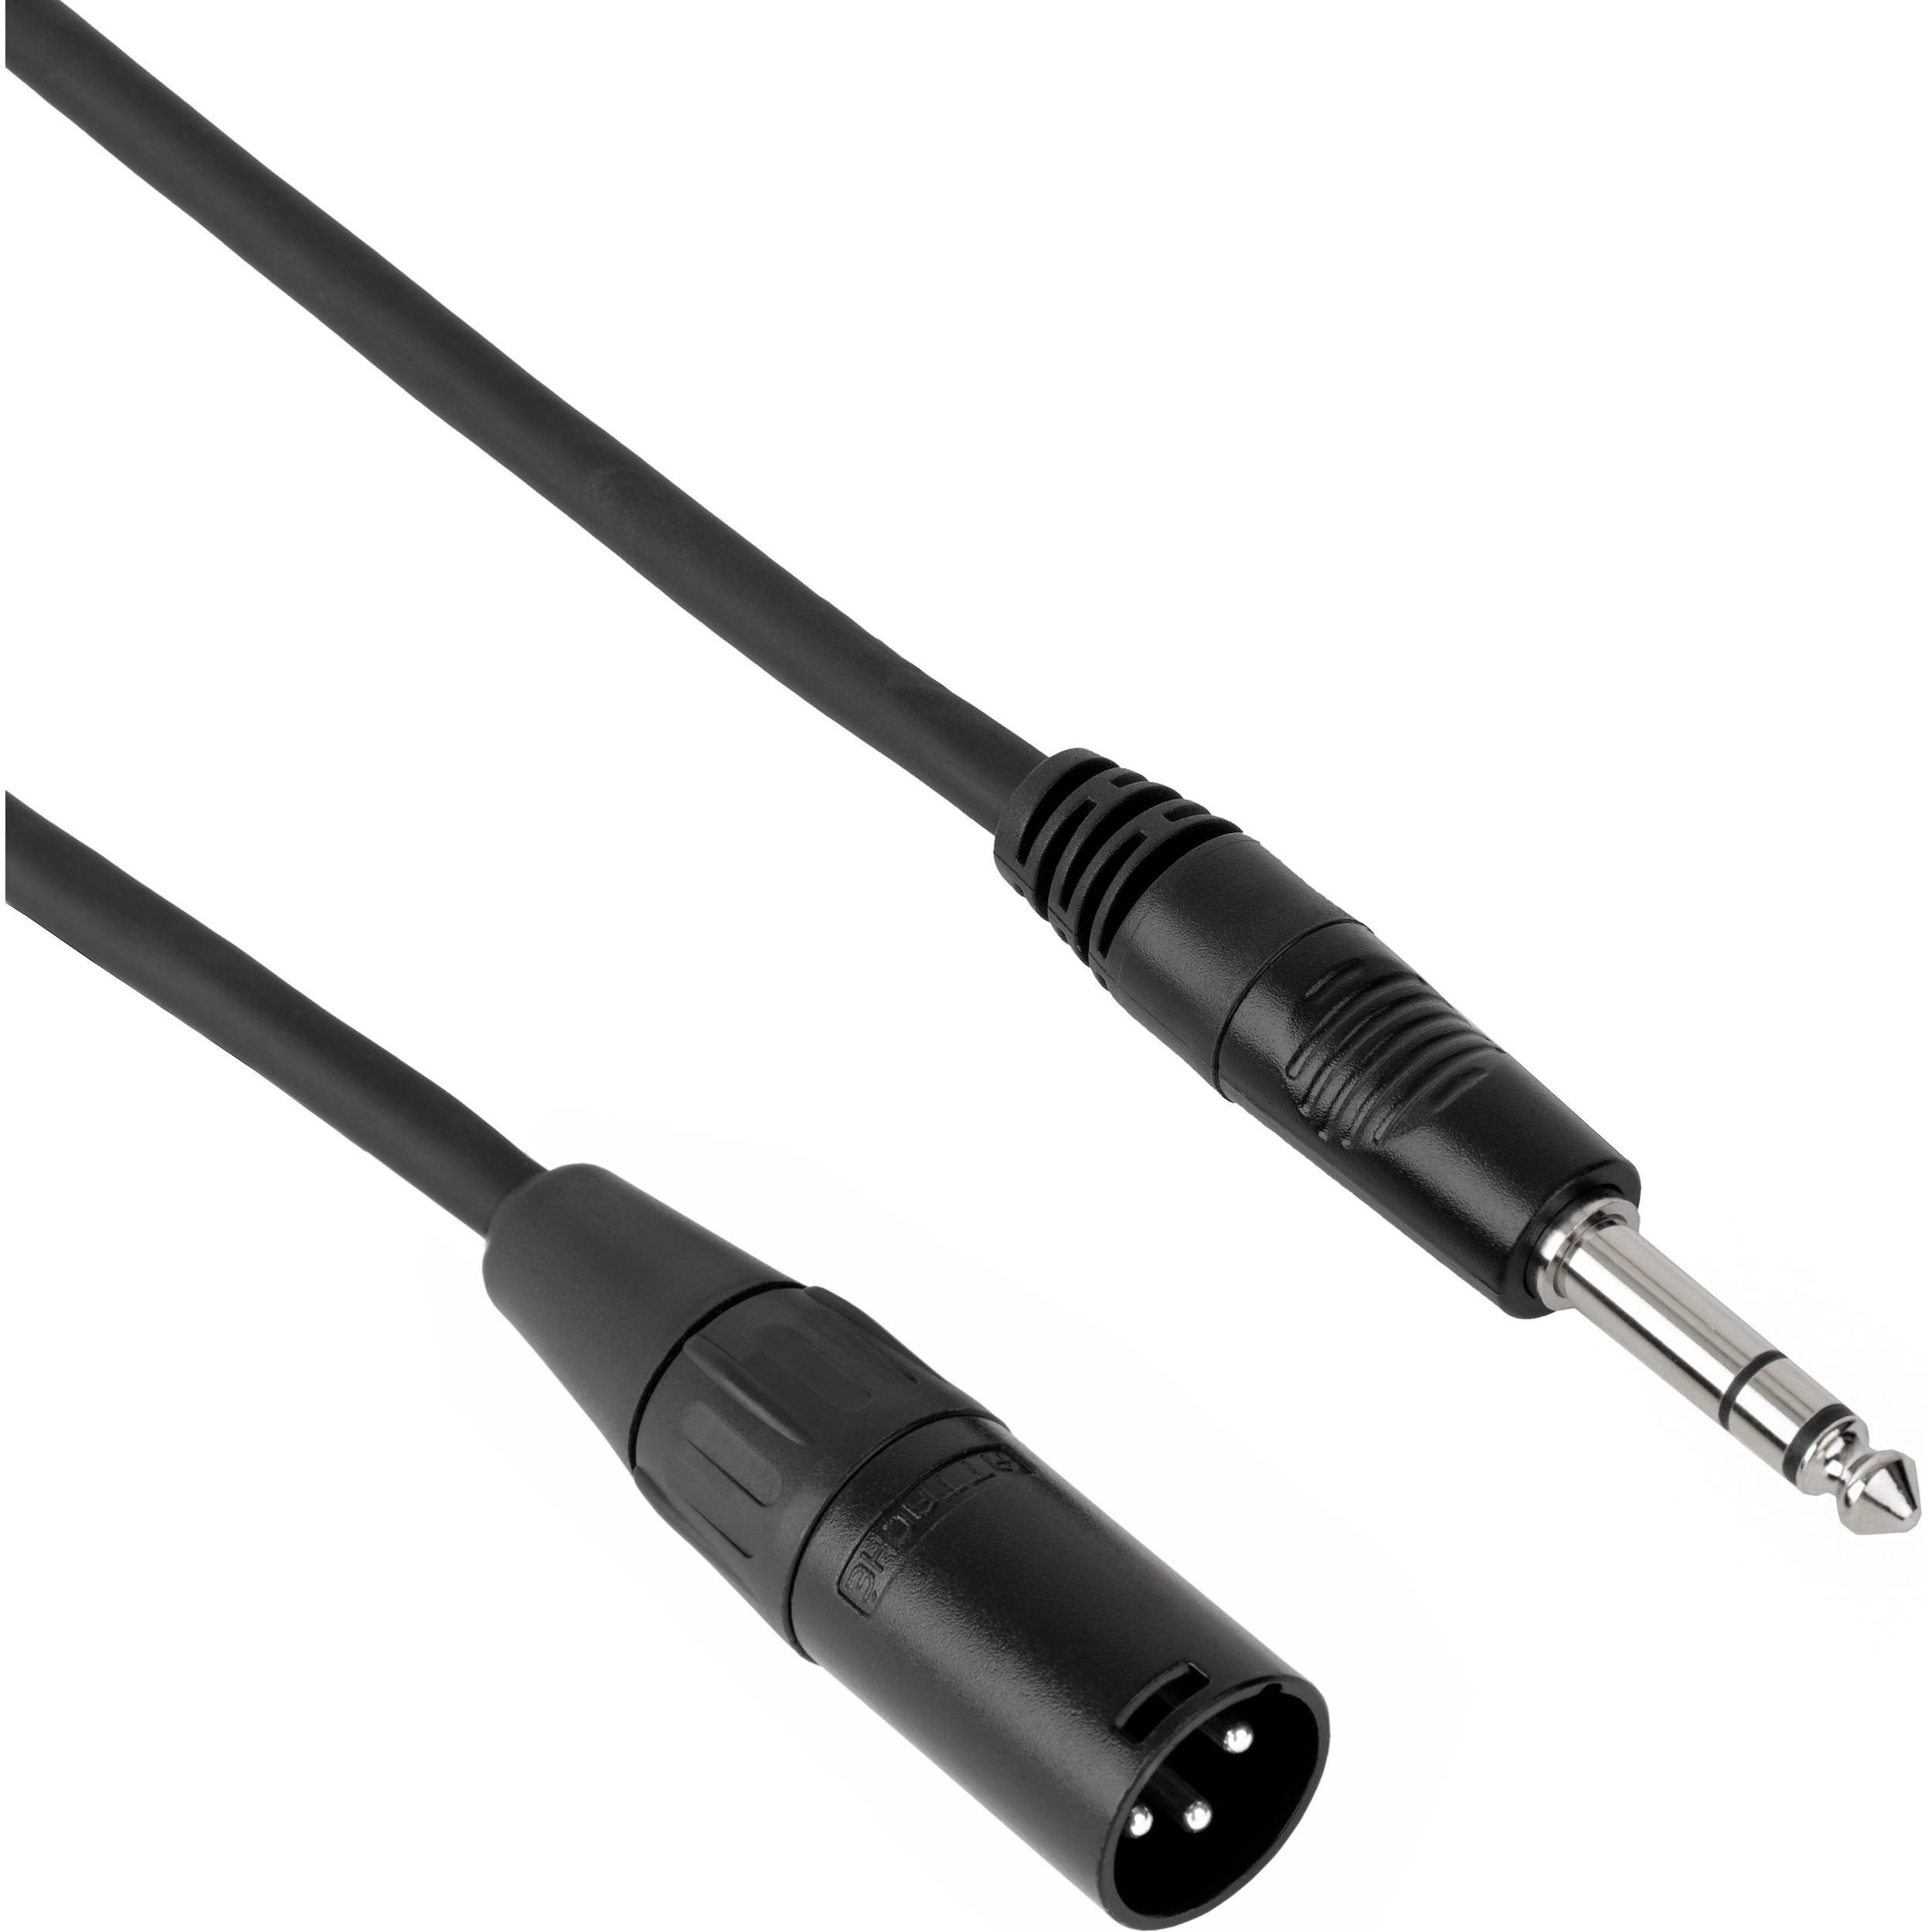 Pearstone PM Series 1/4" TRS M to XLR M Professional Interconnect Cable - 6' (1.8 m)